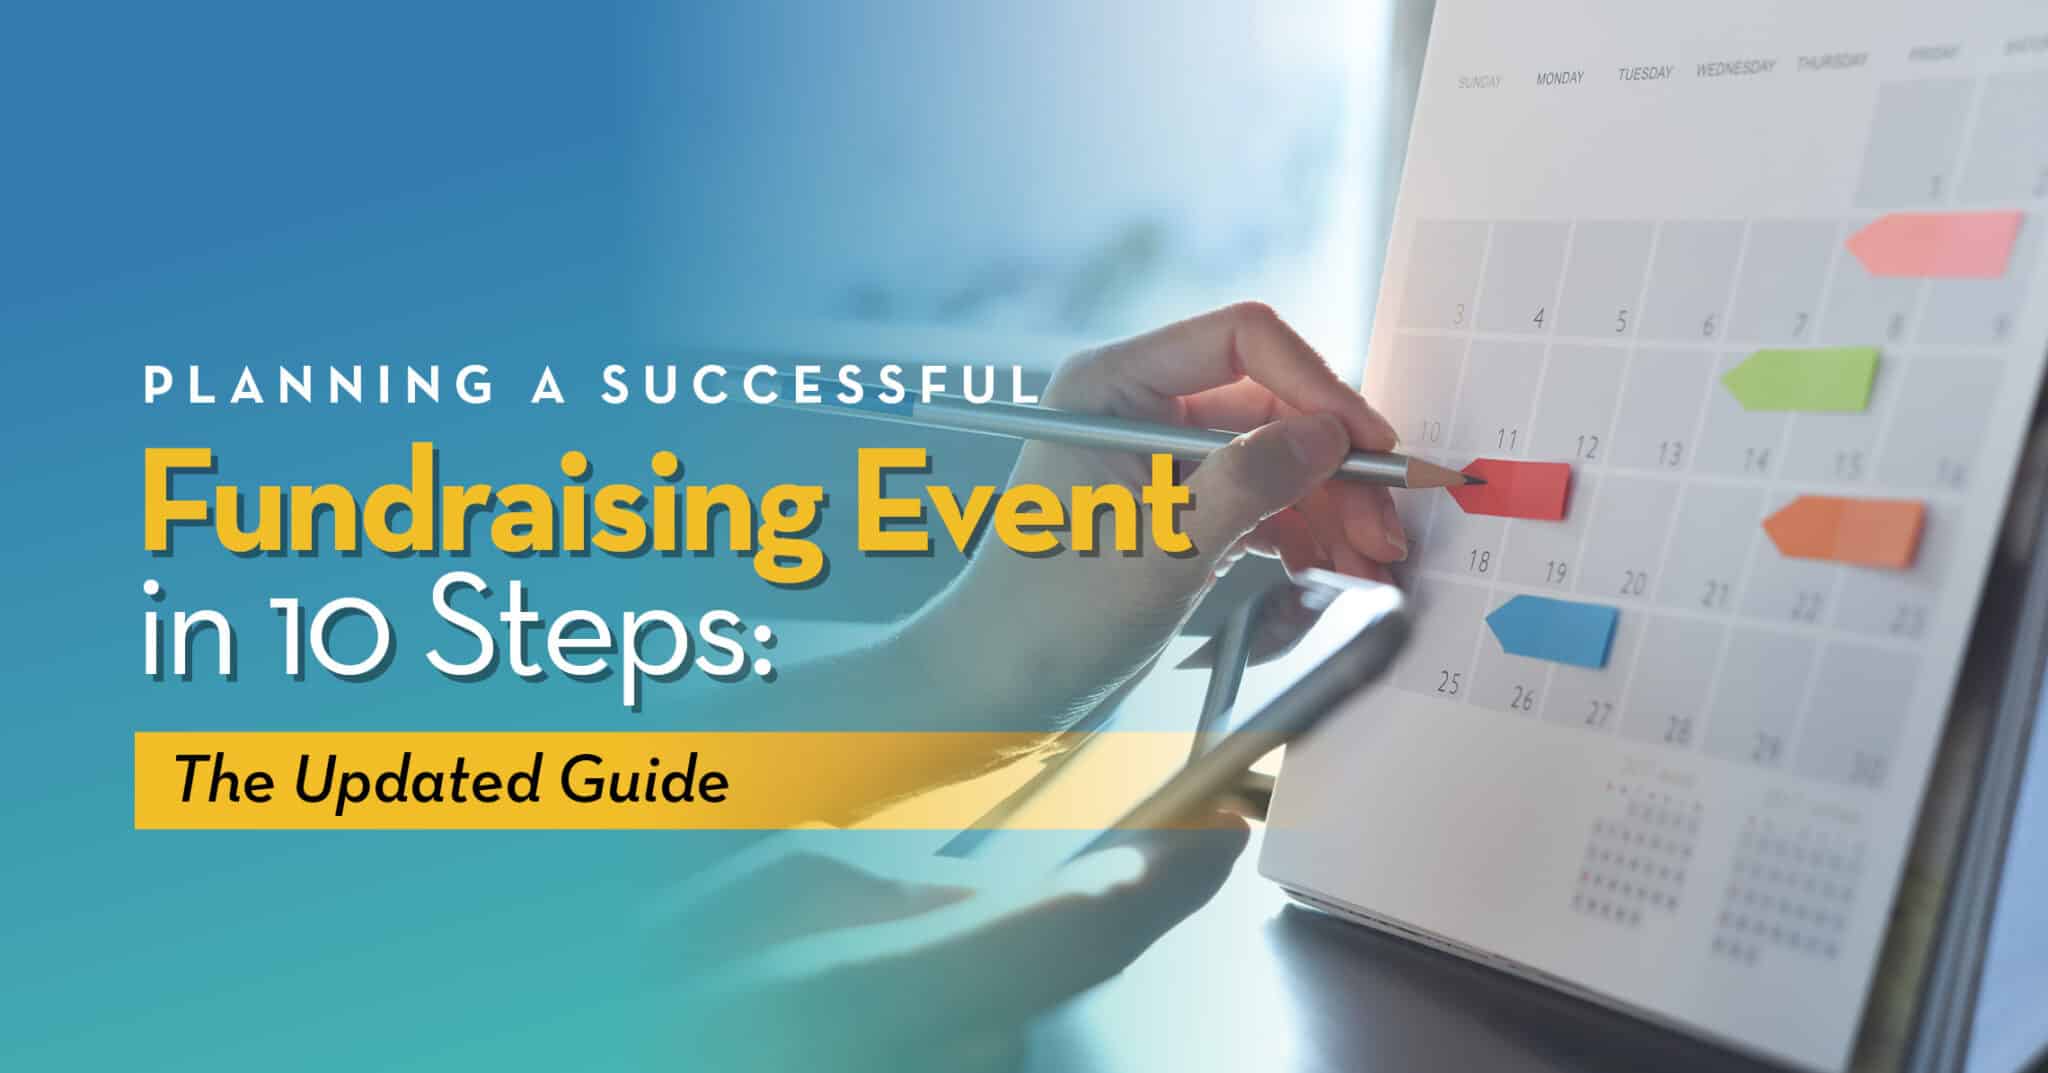 How to use your brand ambassador properly for events